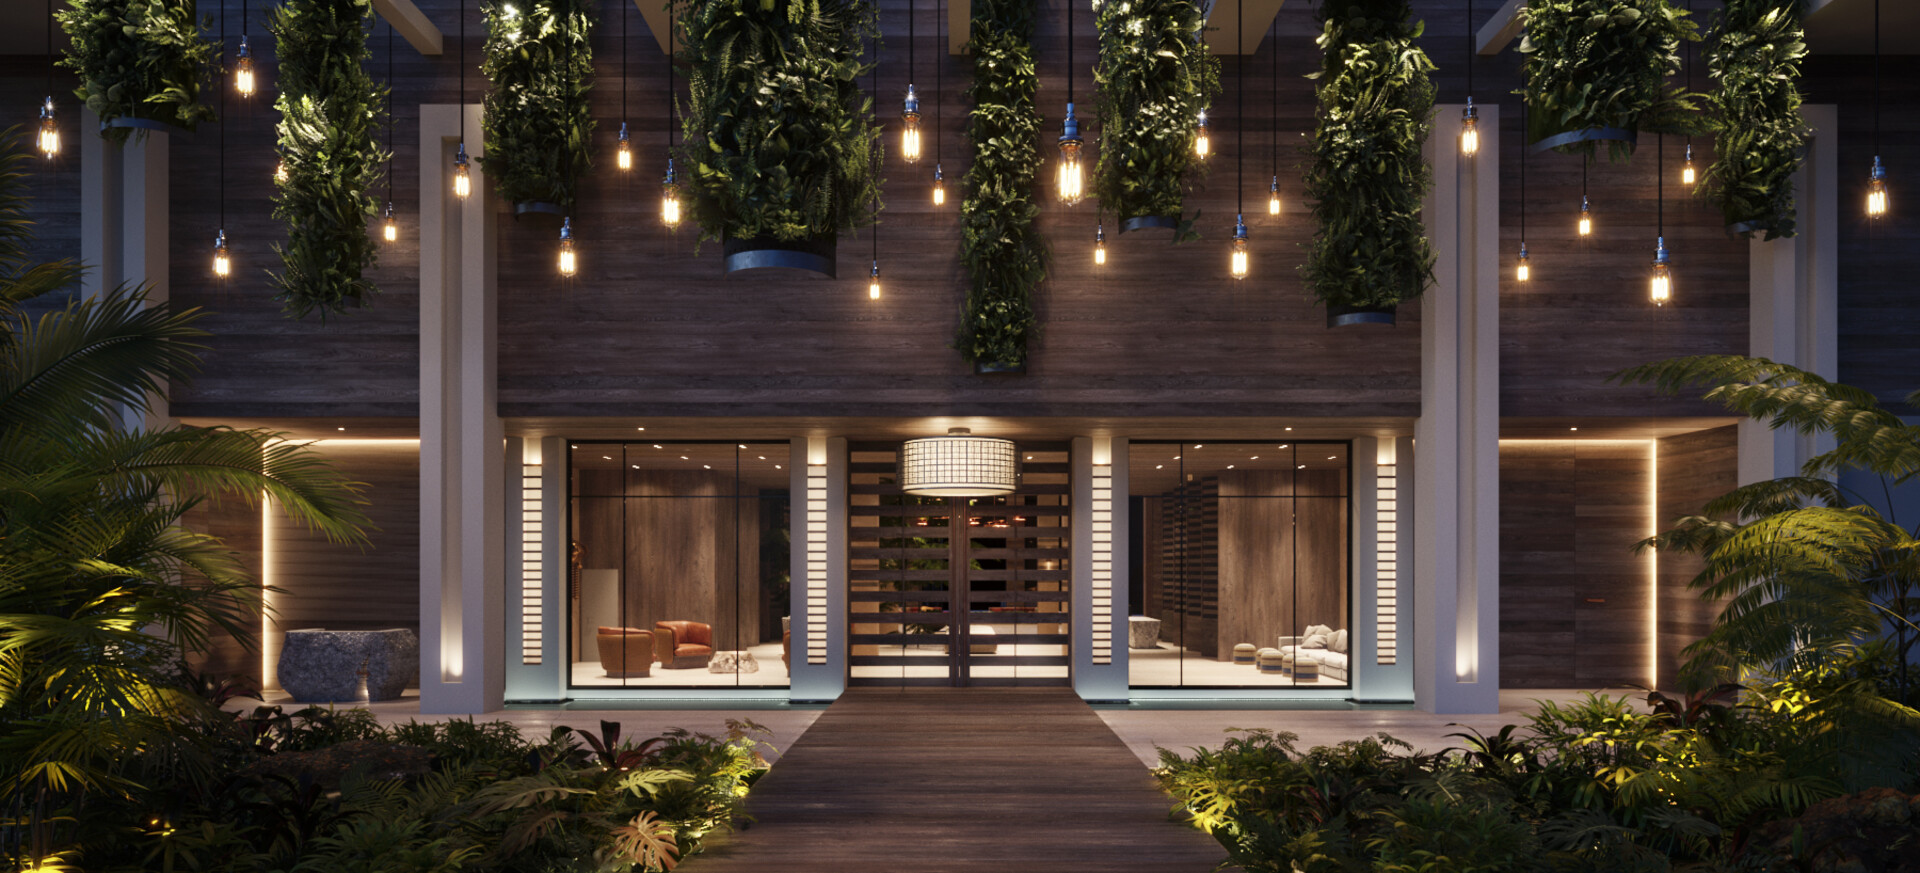 Entryway of Grand Hyatt Grand Cayman residences, ambiently lit and lush with greenery